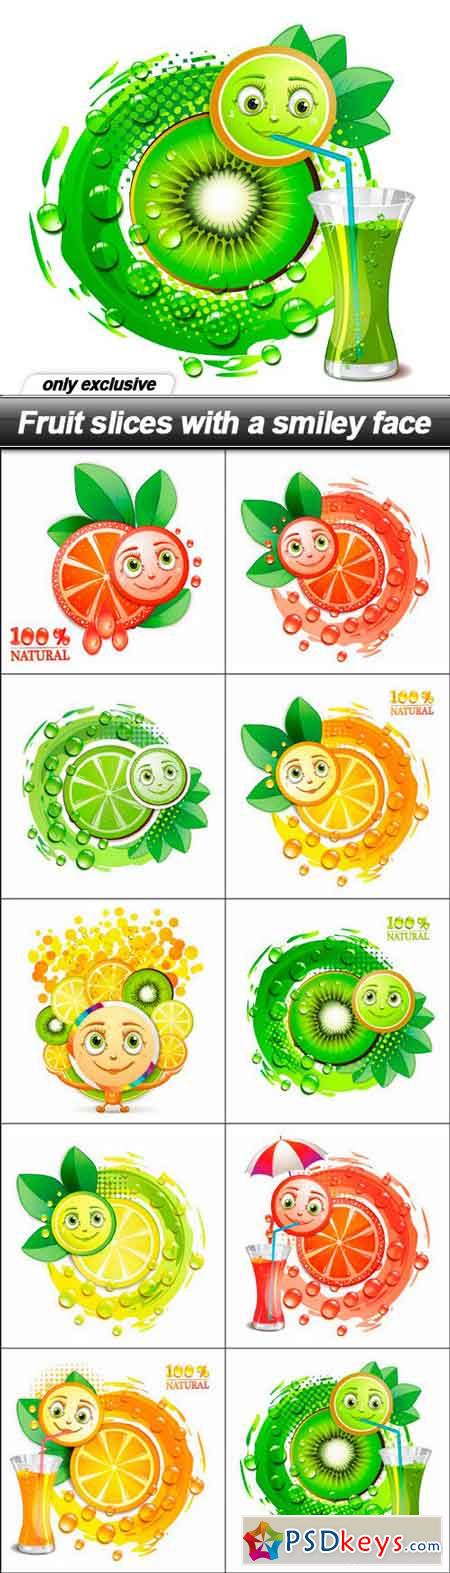 Fruit slices with a smiley face - 10 EPS